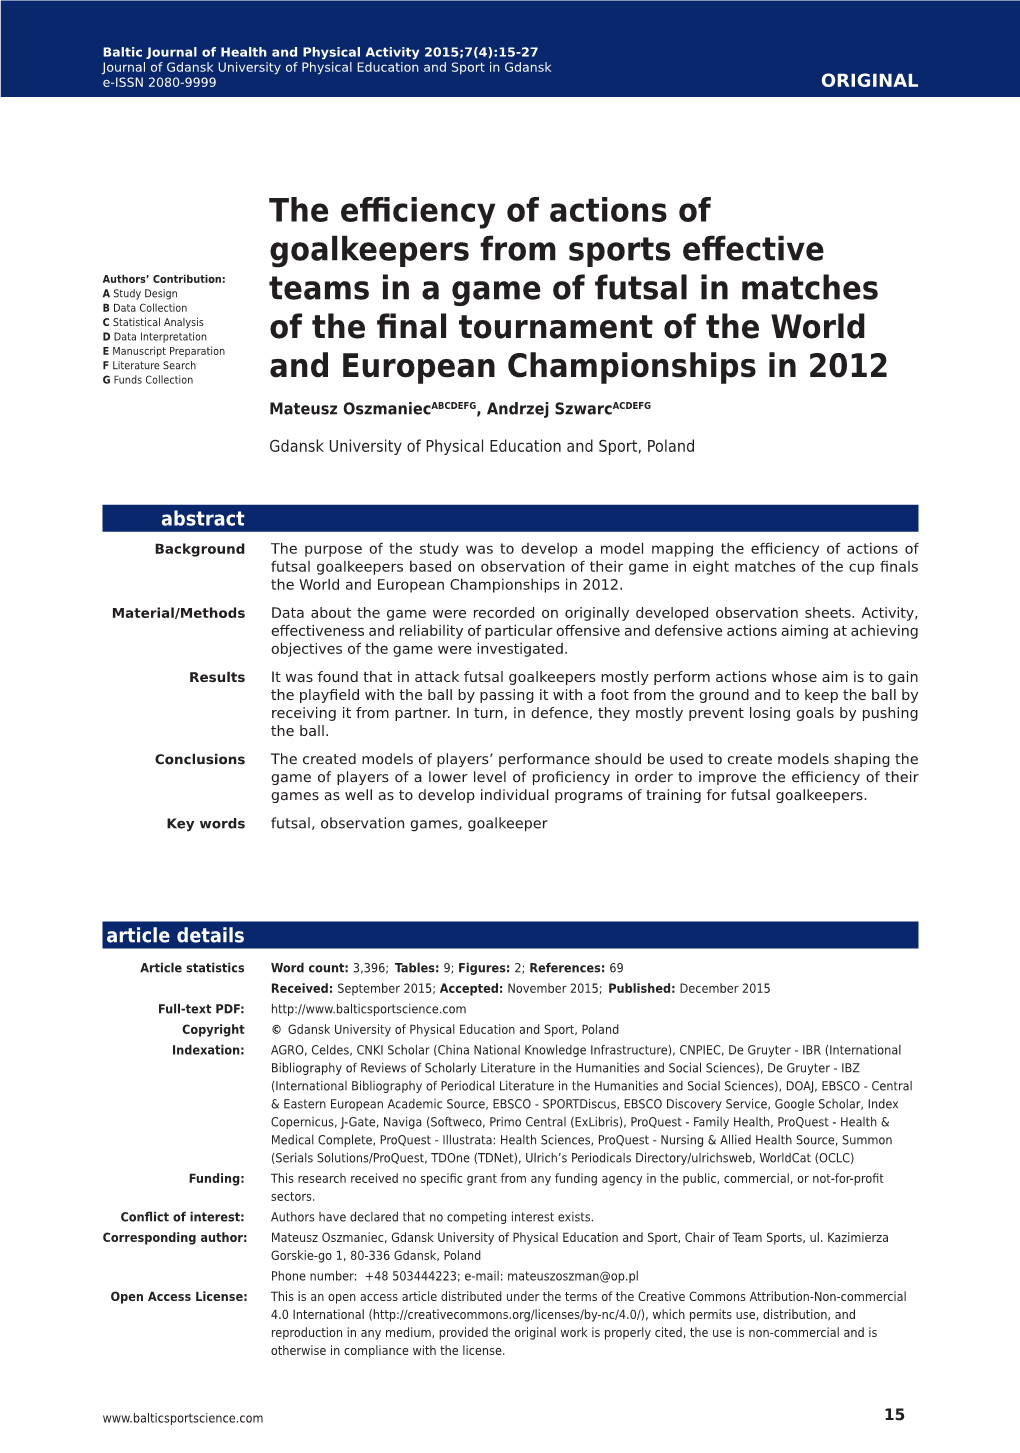 The Efficiency of Actions of Goalkeepers from Sports Effective